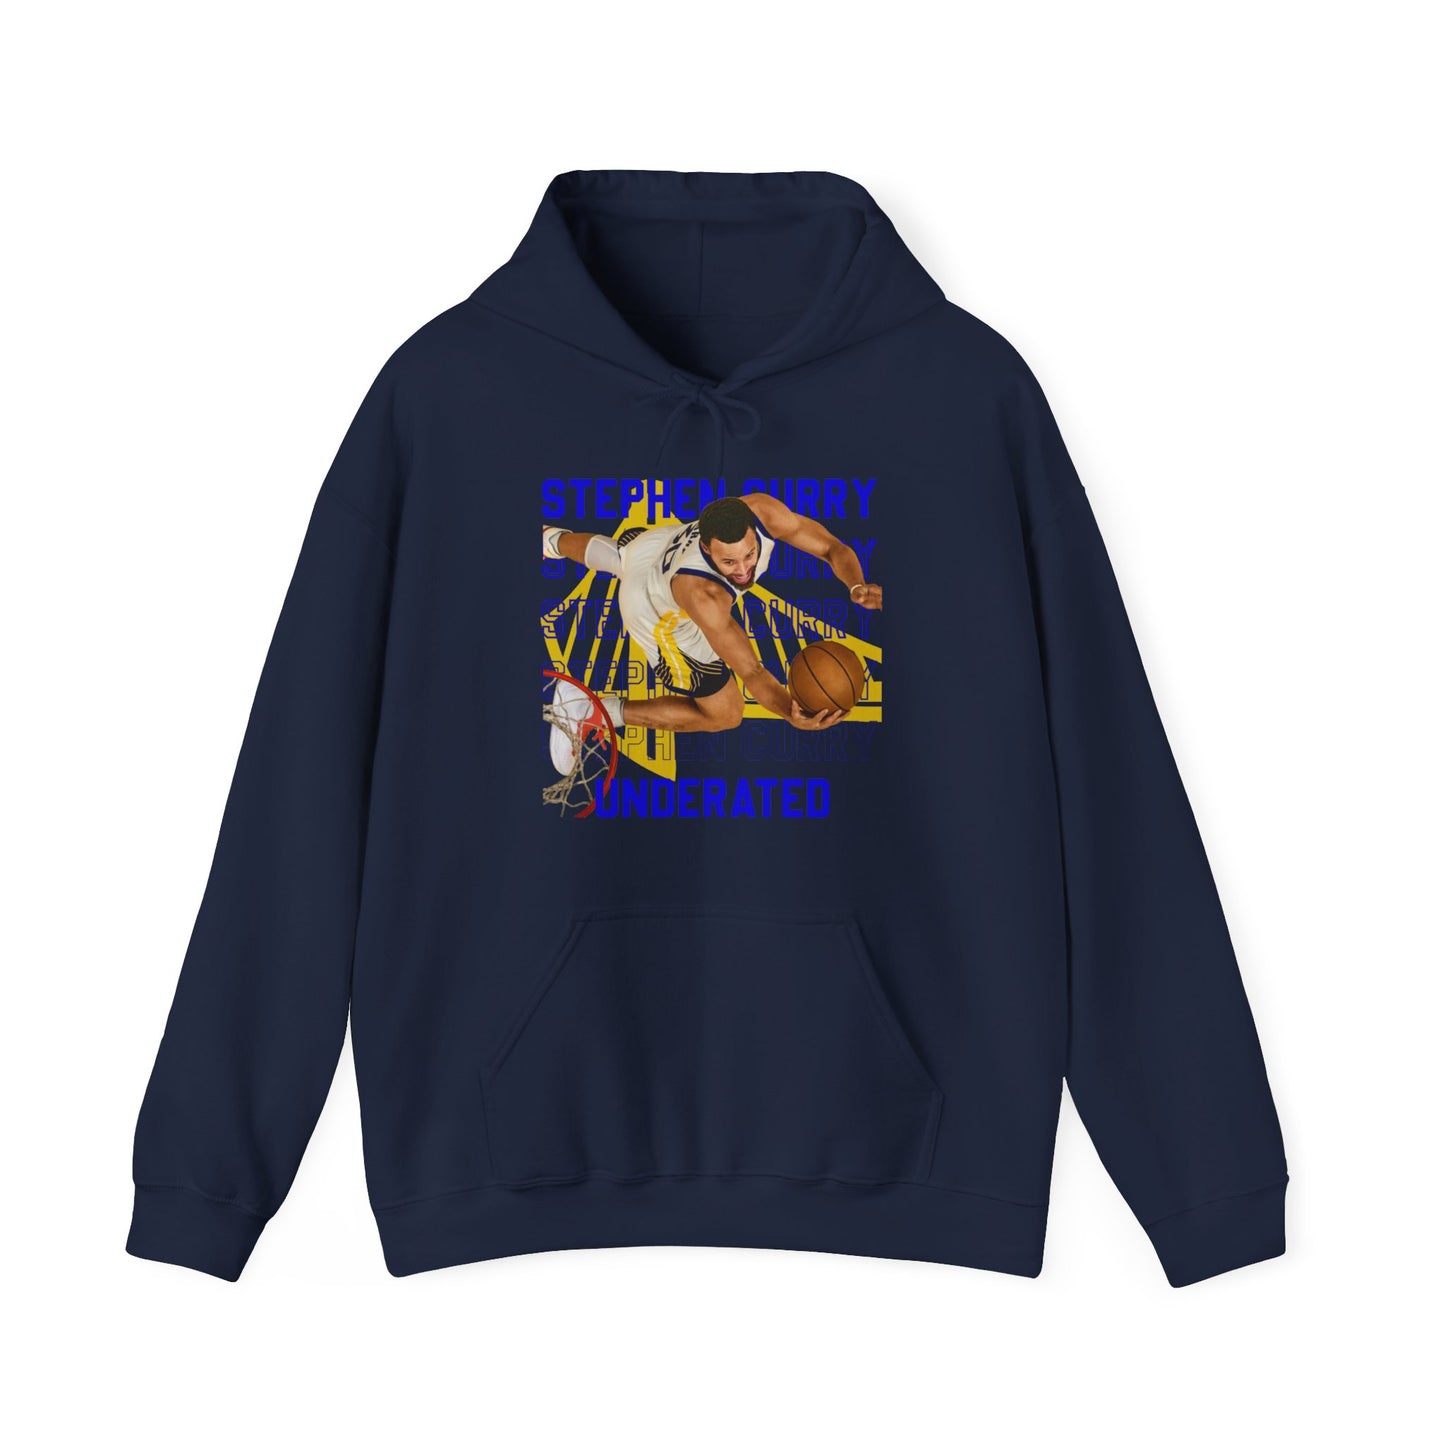 Golden State Warriors Stephen Curry Underated High Quality Unisex Heavy Blend™ Hoodie